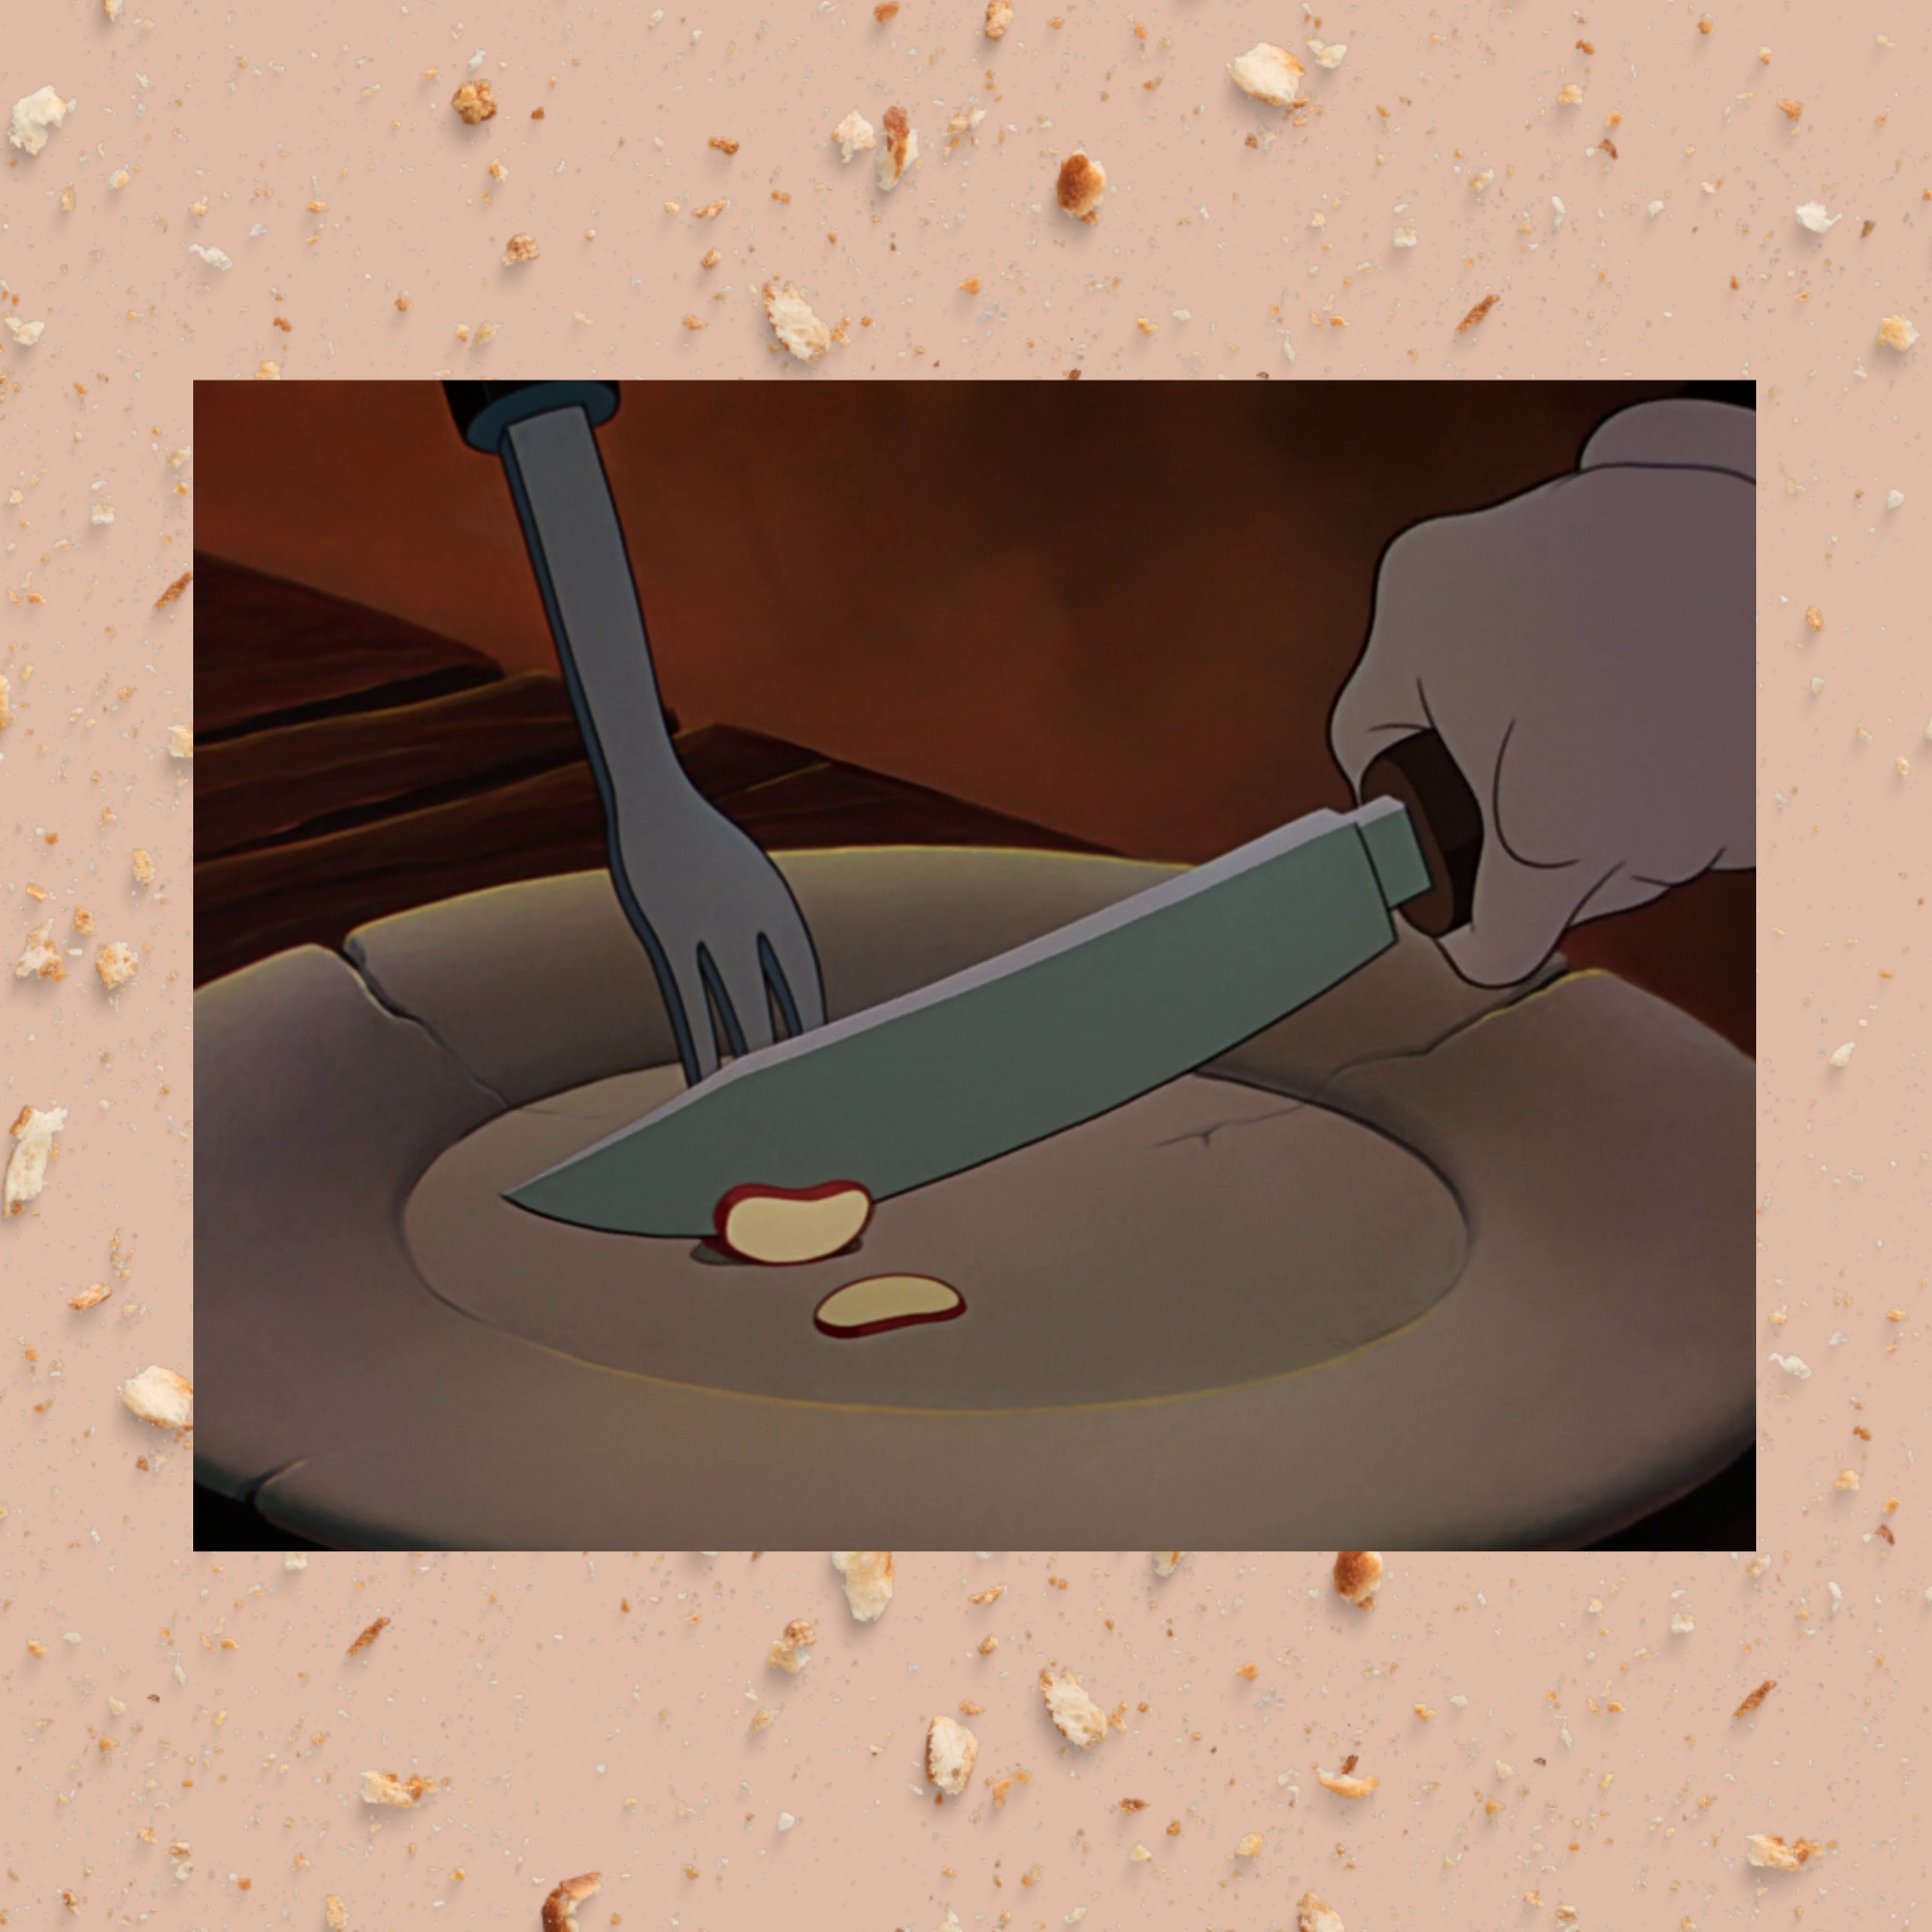 background with crumbs and a still of a fork and knife cutting through a single bean